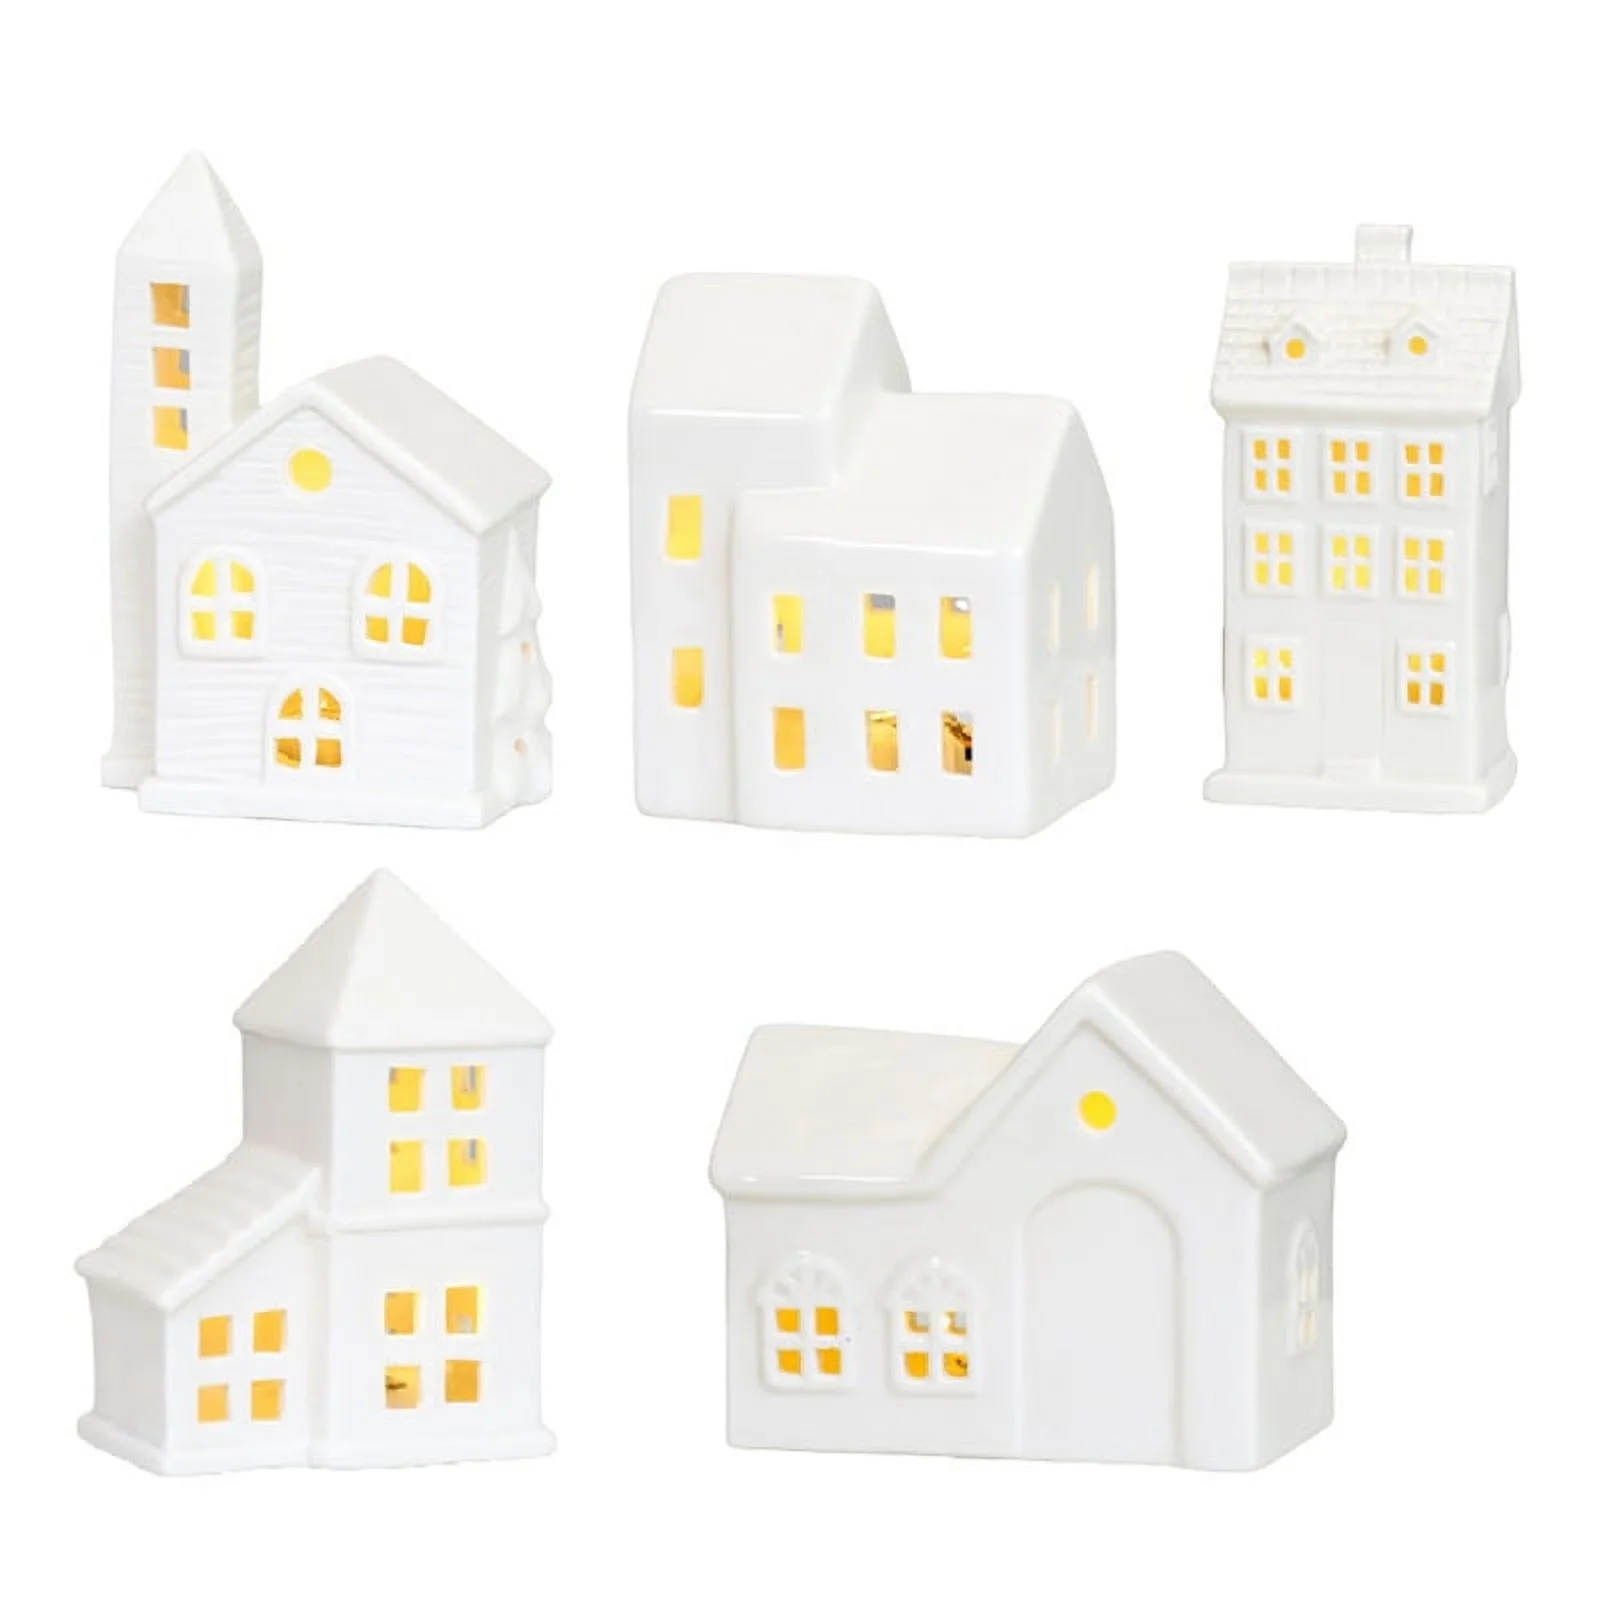 Christmas decorating ideas with white ceramic houses